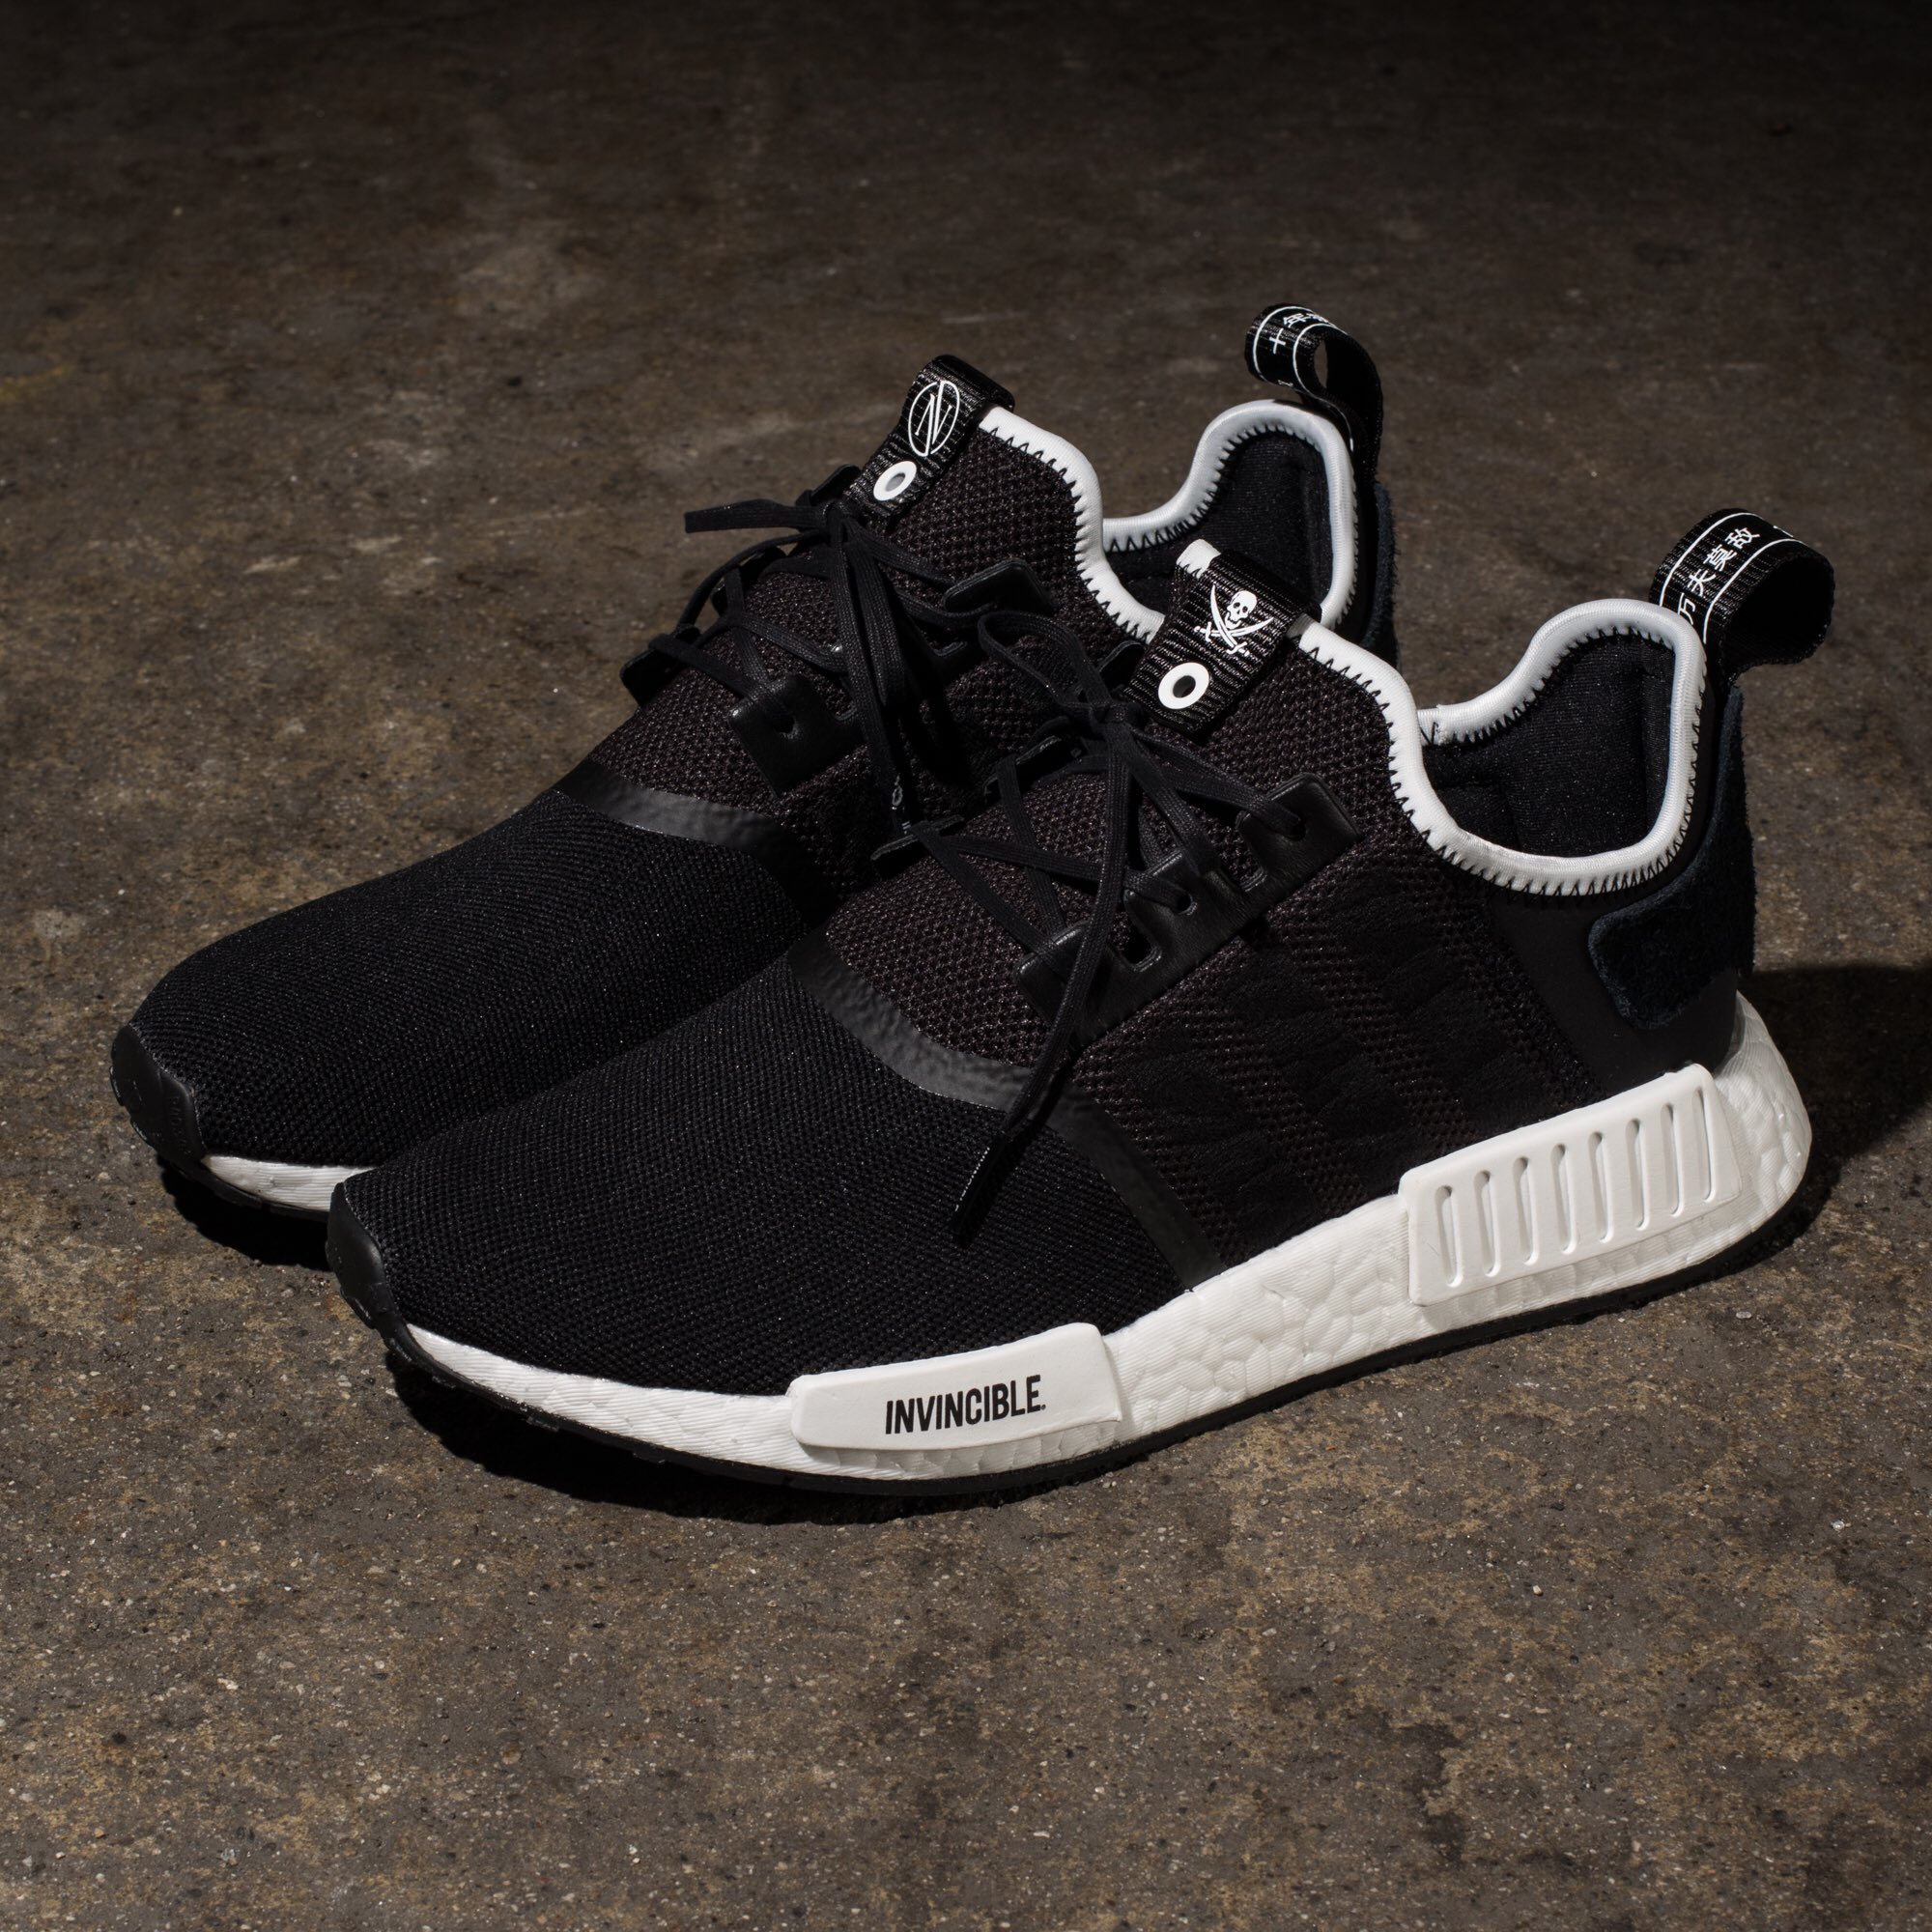 jul Intuition butiksindehaveren UNDEFEATED on X: "adidas Consortium x Invincible x Neighborhood NMD R1 //  Available Friday 12/29 at All Undefeated Chapter Stores and  https://t.co/rPhV7ZP2Fc https://t.co/Xtw4Zdk92m" / X